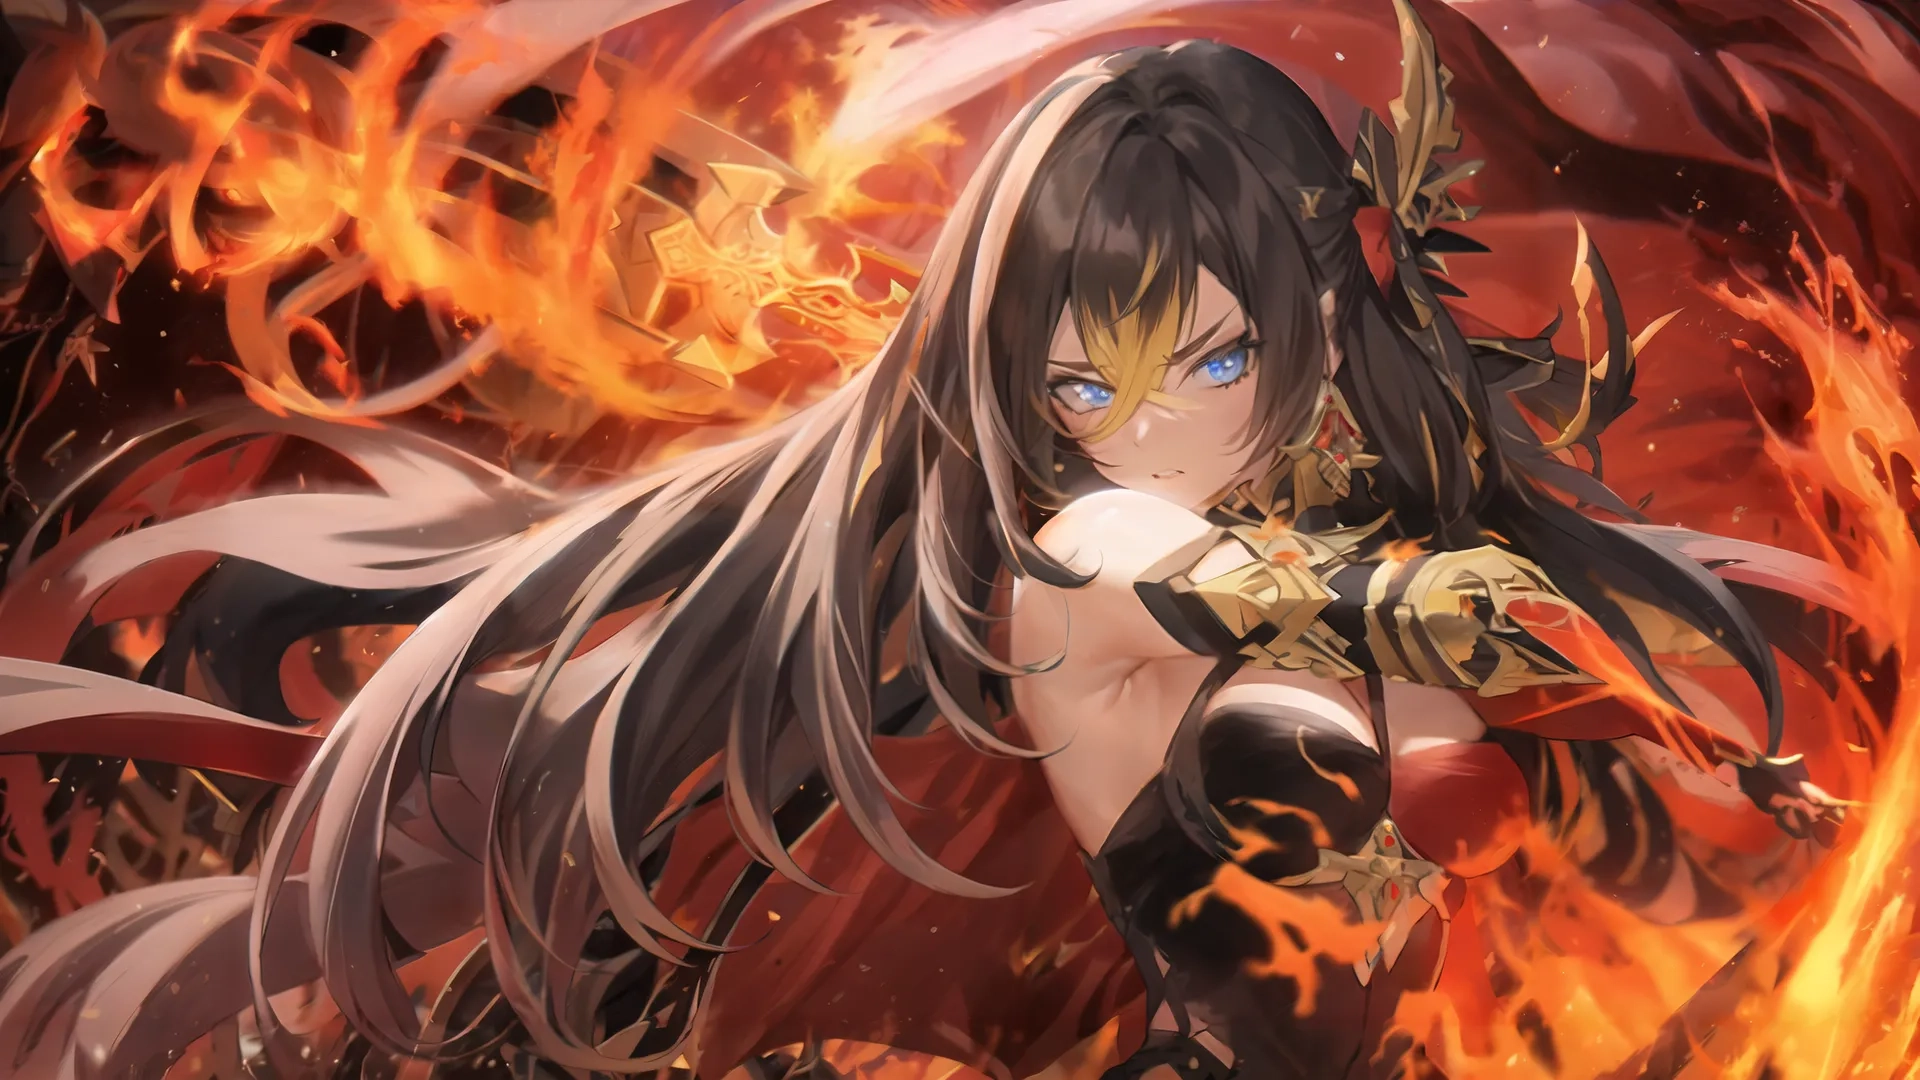 the anime girl is surrounded by fire and flames by herself she looks very fine because of her appearance in this image, but is so cute
